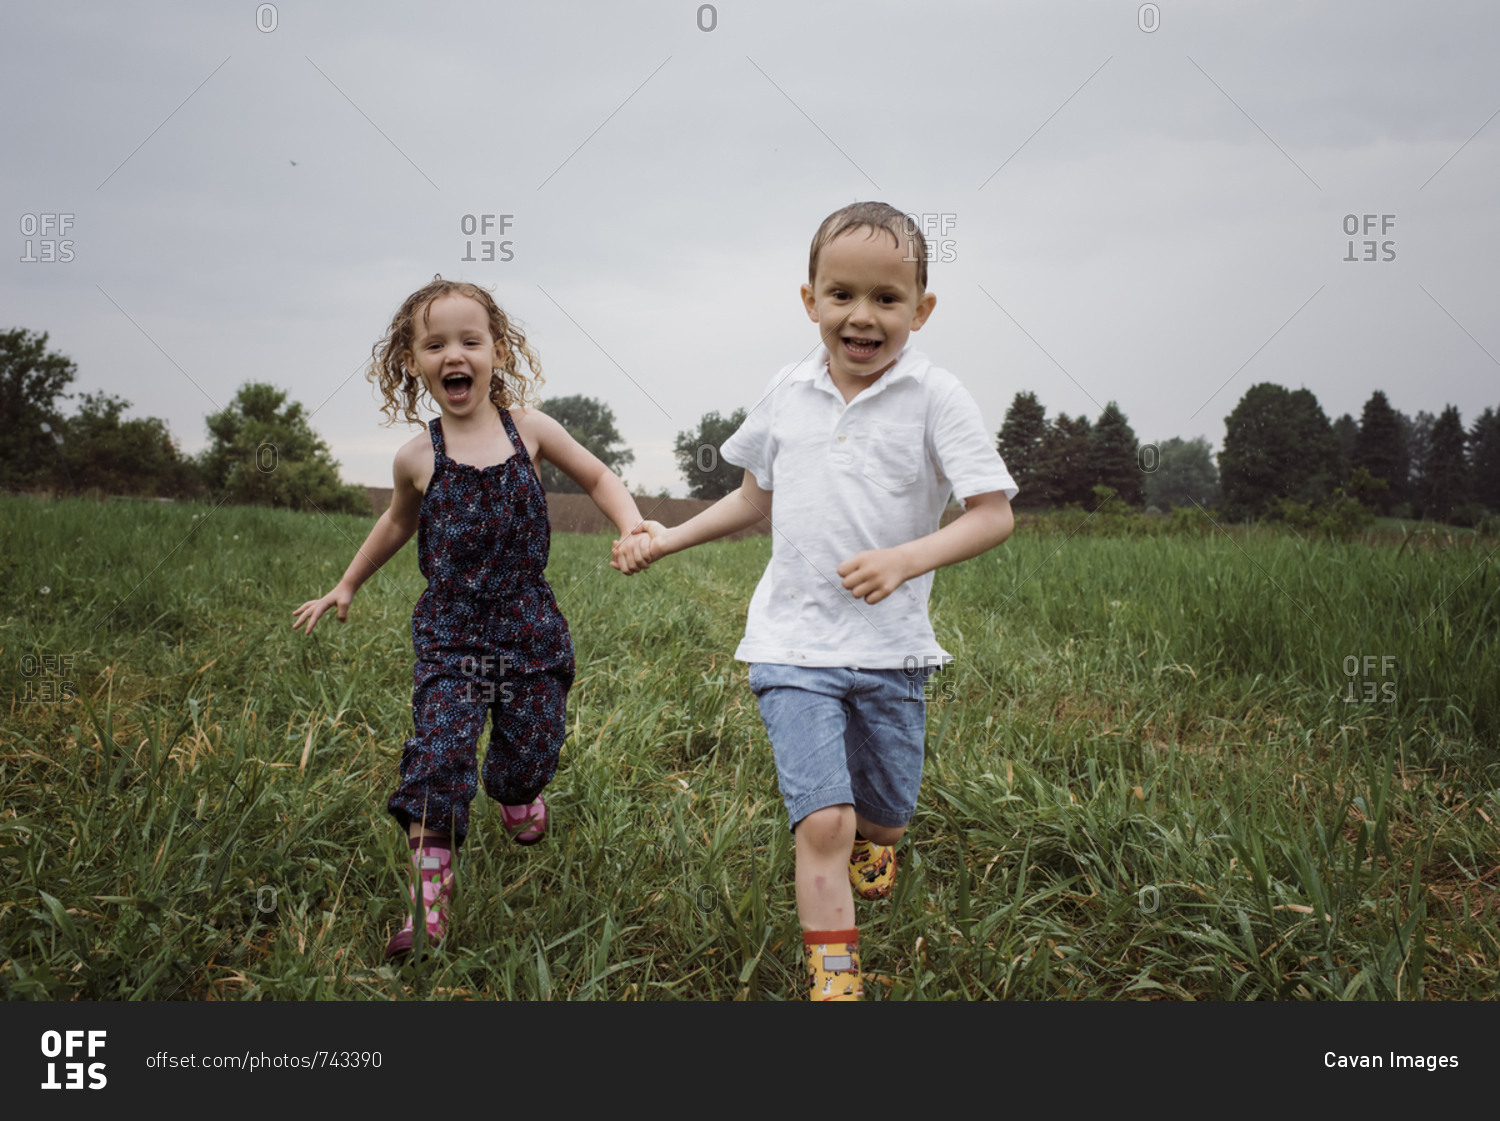 Portrait of happy wet siblings holding hands while running on grassy field against sky at park during rainy season